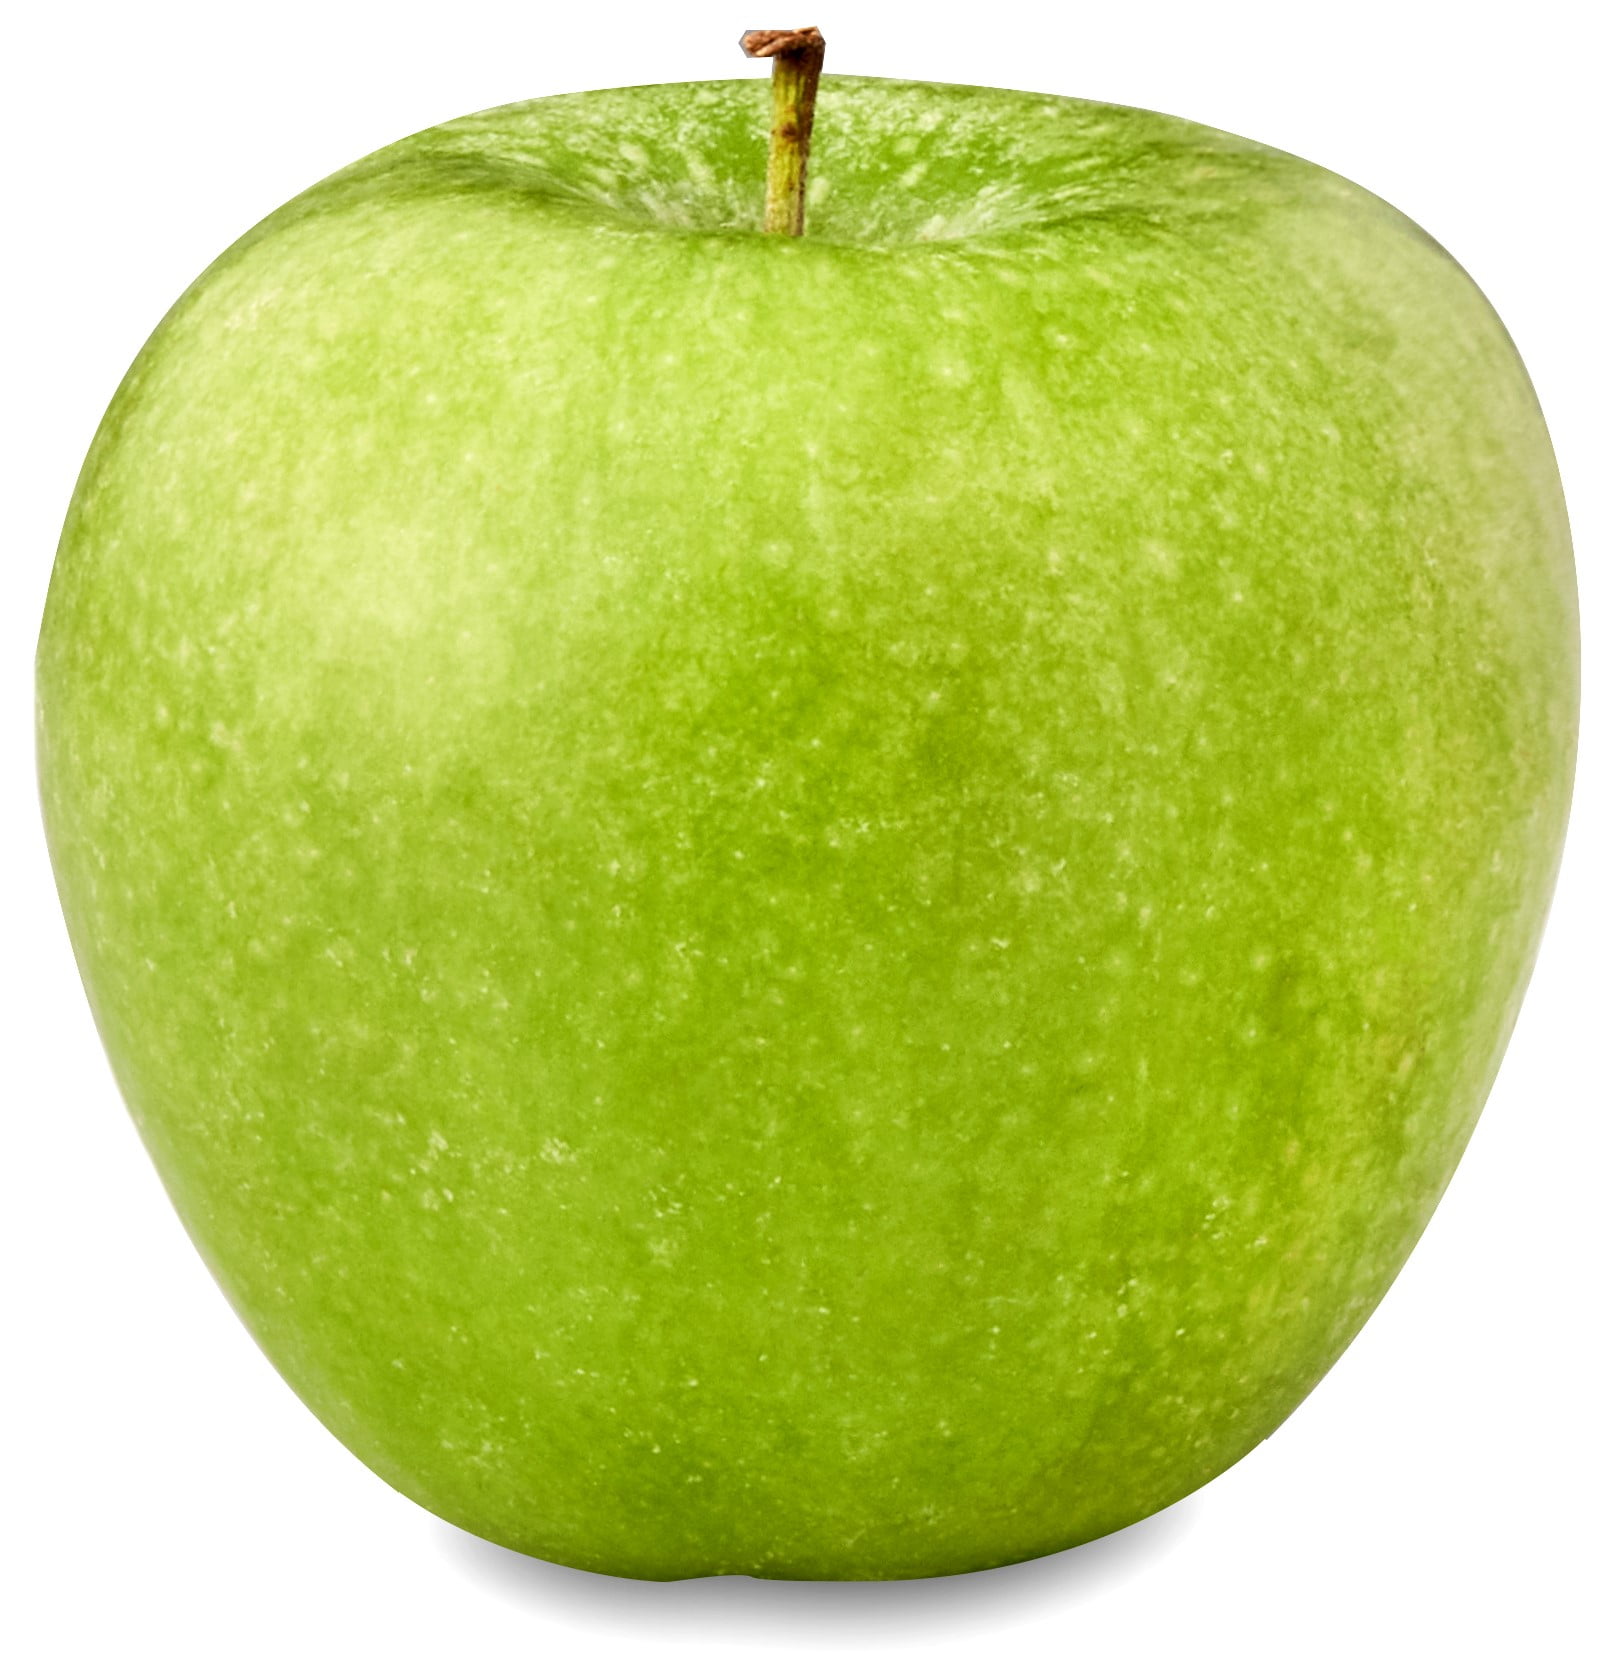 Simple Truth Organic™ Granny Smith Apples - 2 Pound Bag, Bag/ 2 Pounds -  Kroger